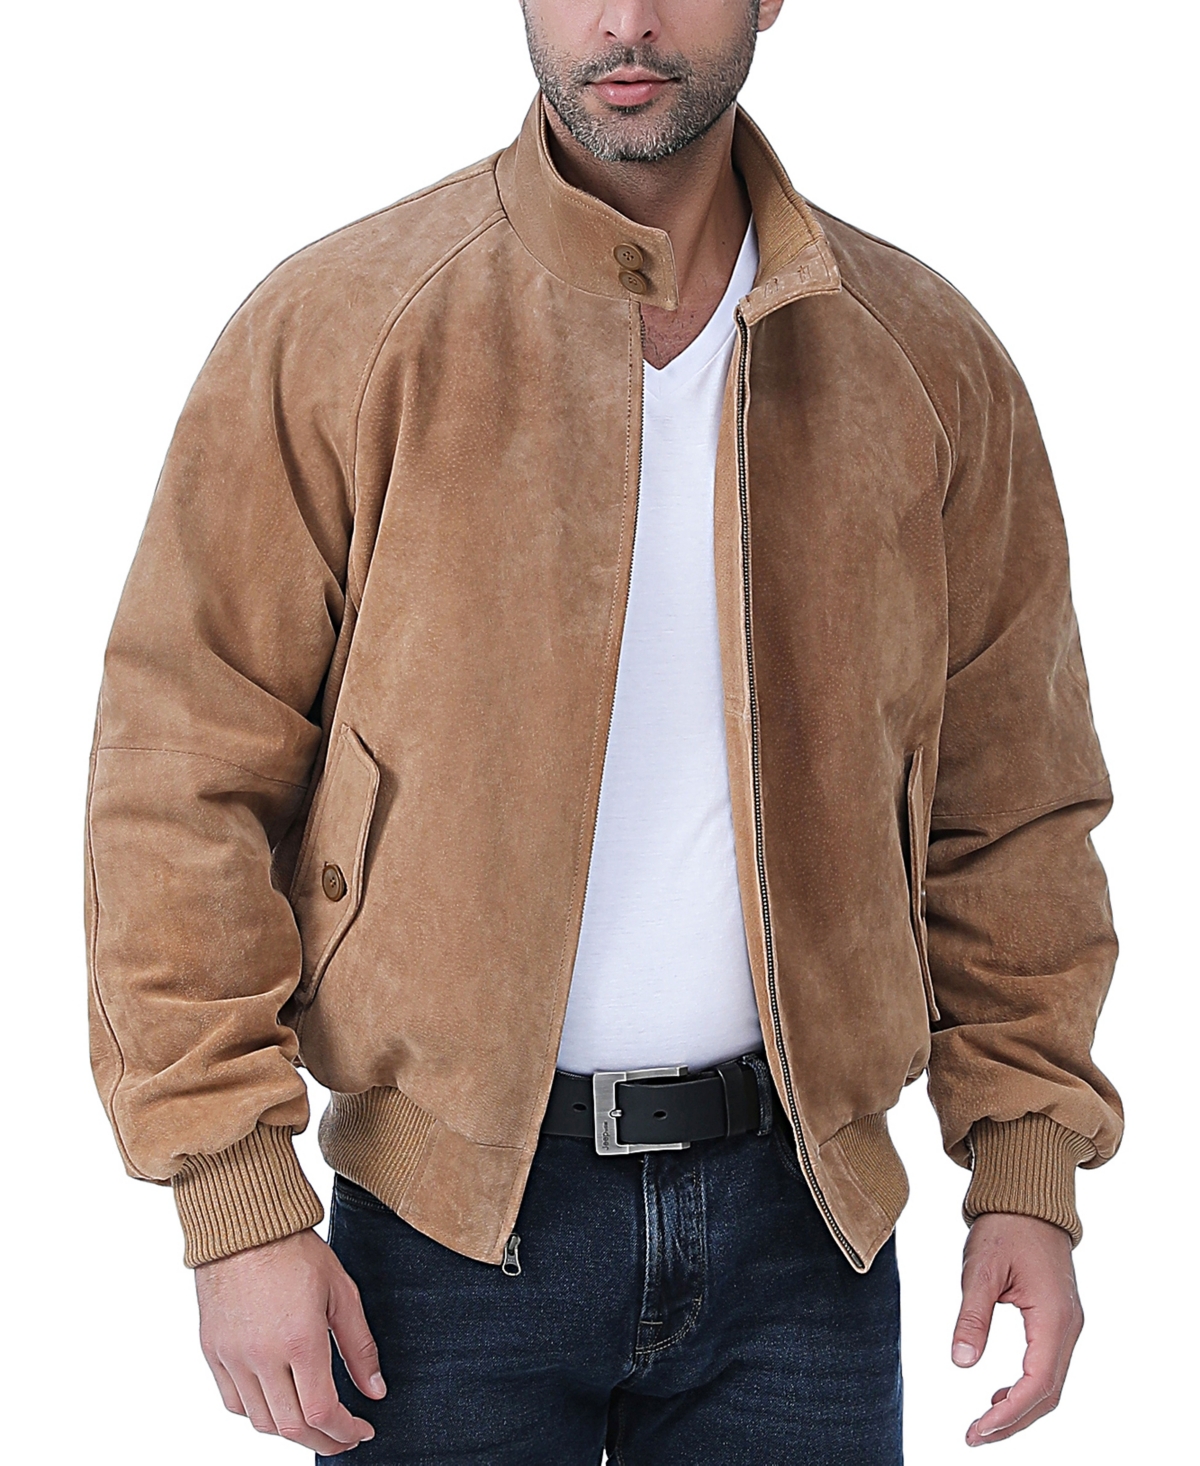 Men Wwii Suede Leather Bomber Jacket - Tobacco